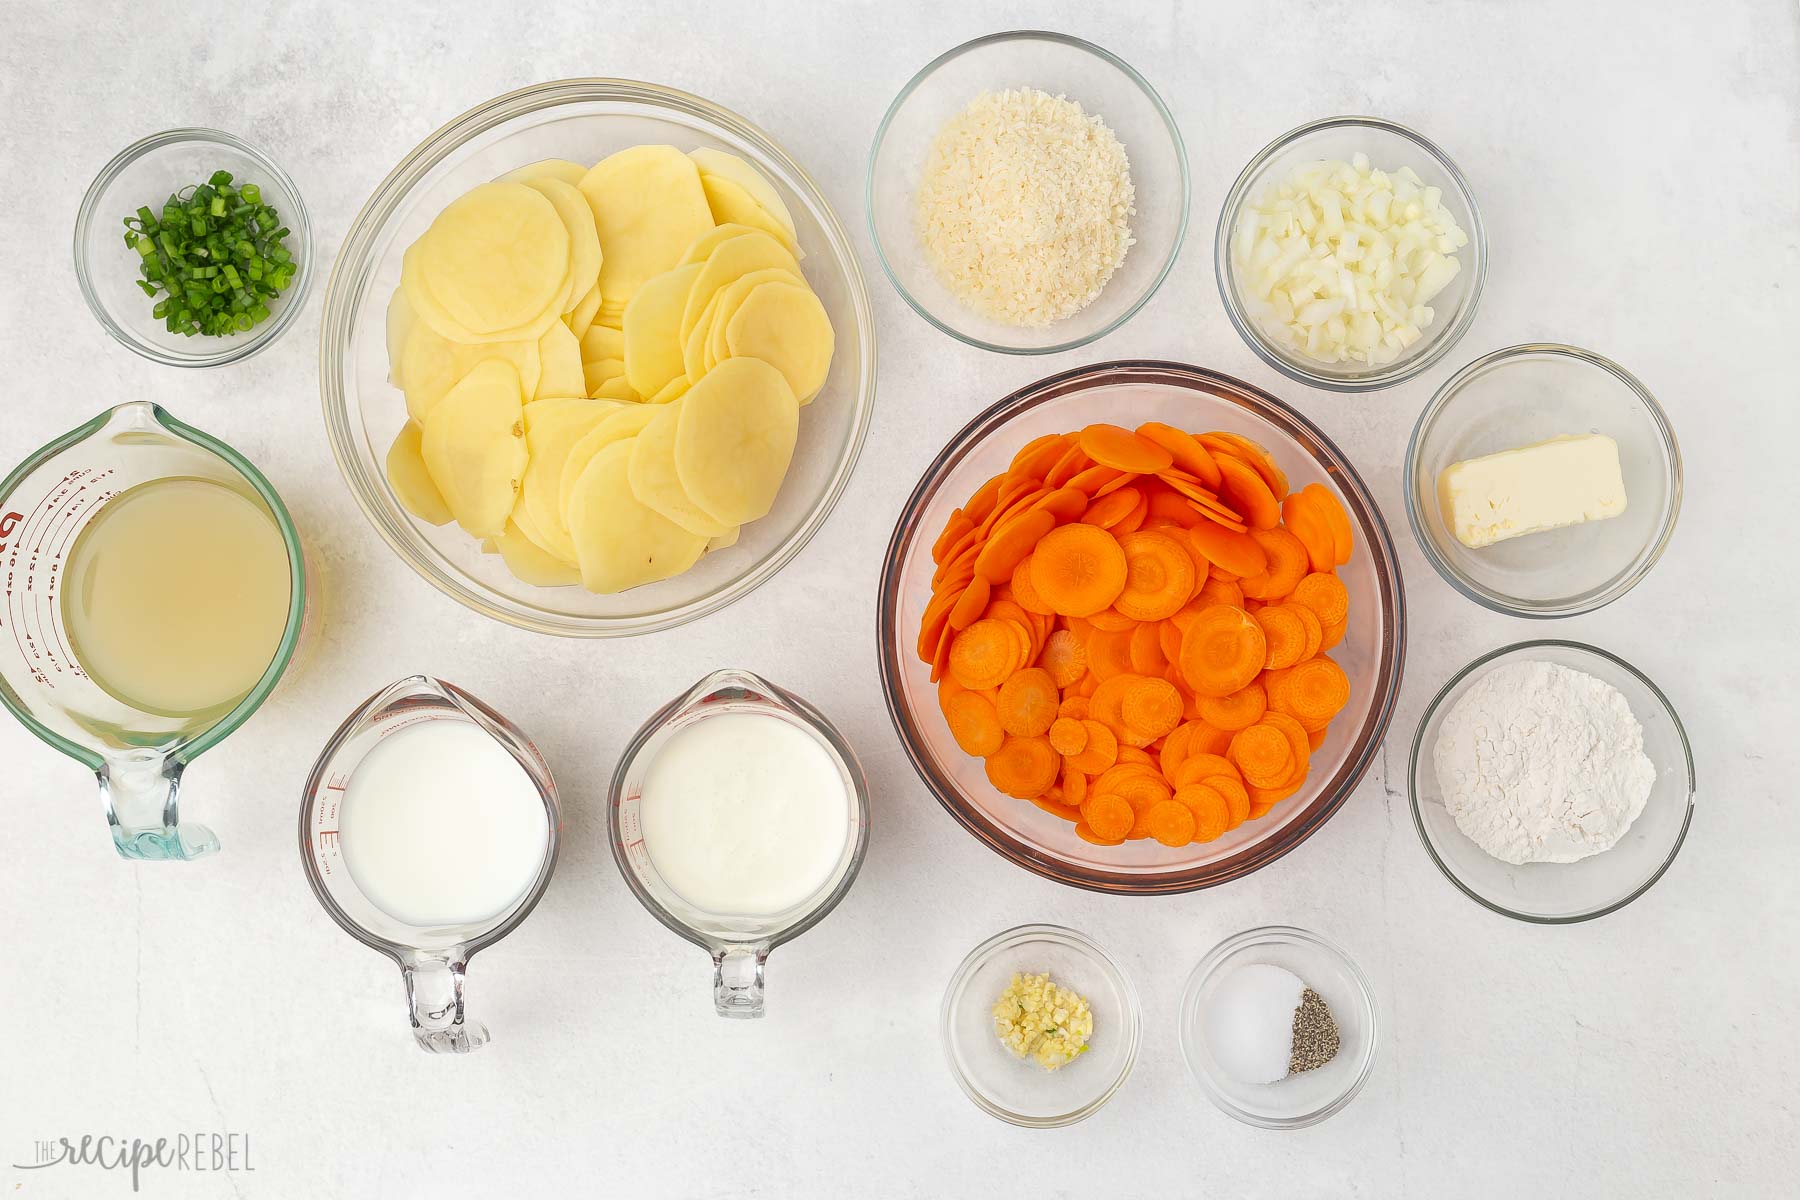 Top view of ingredients needed to make scalloped potatoes and carrots. 